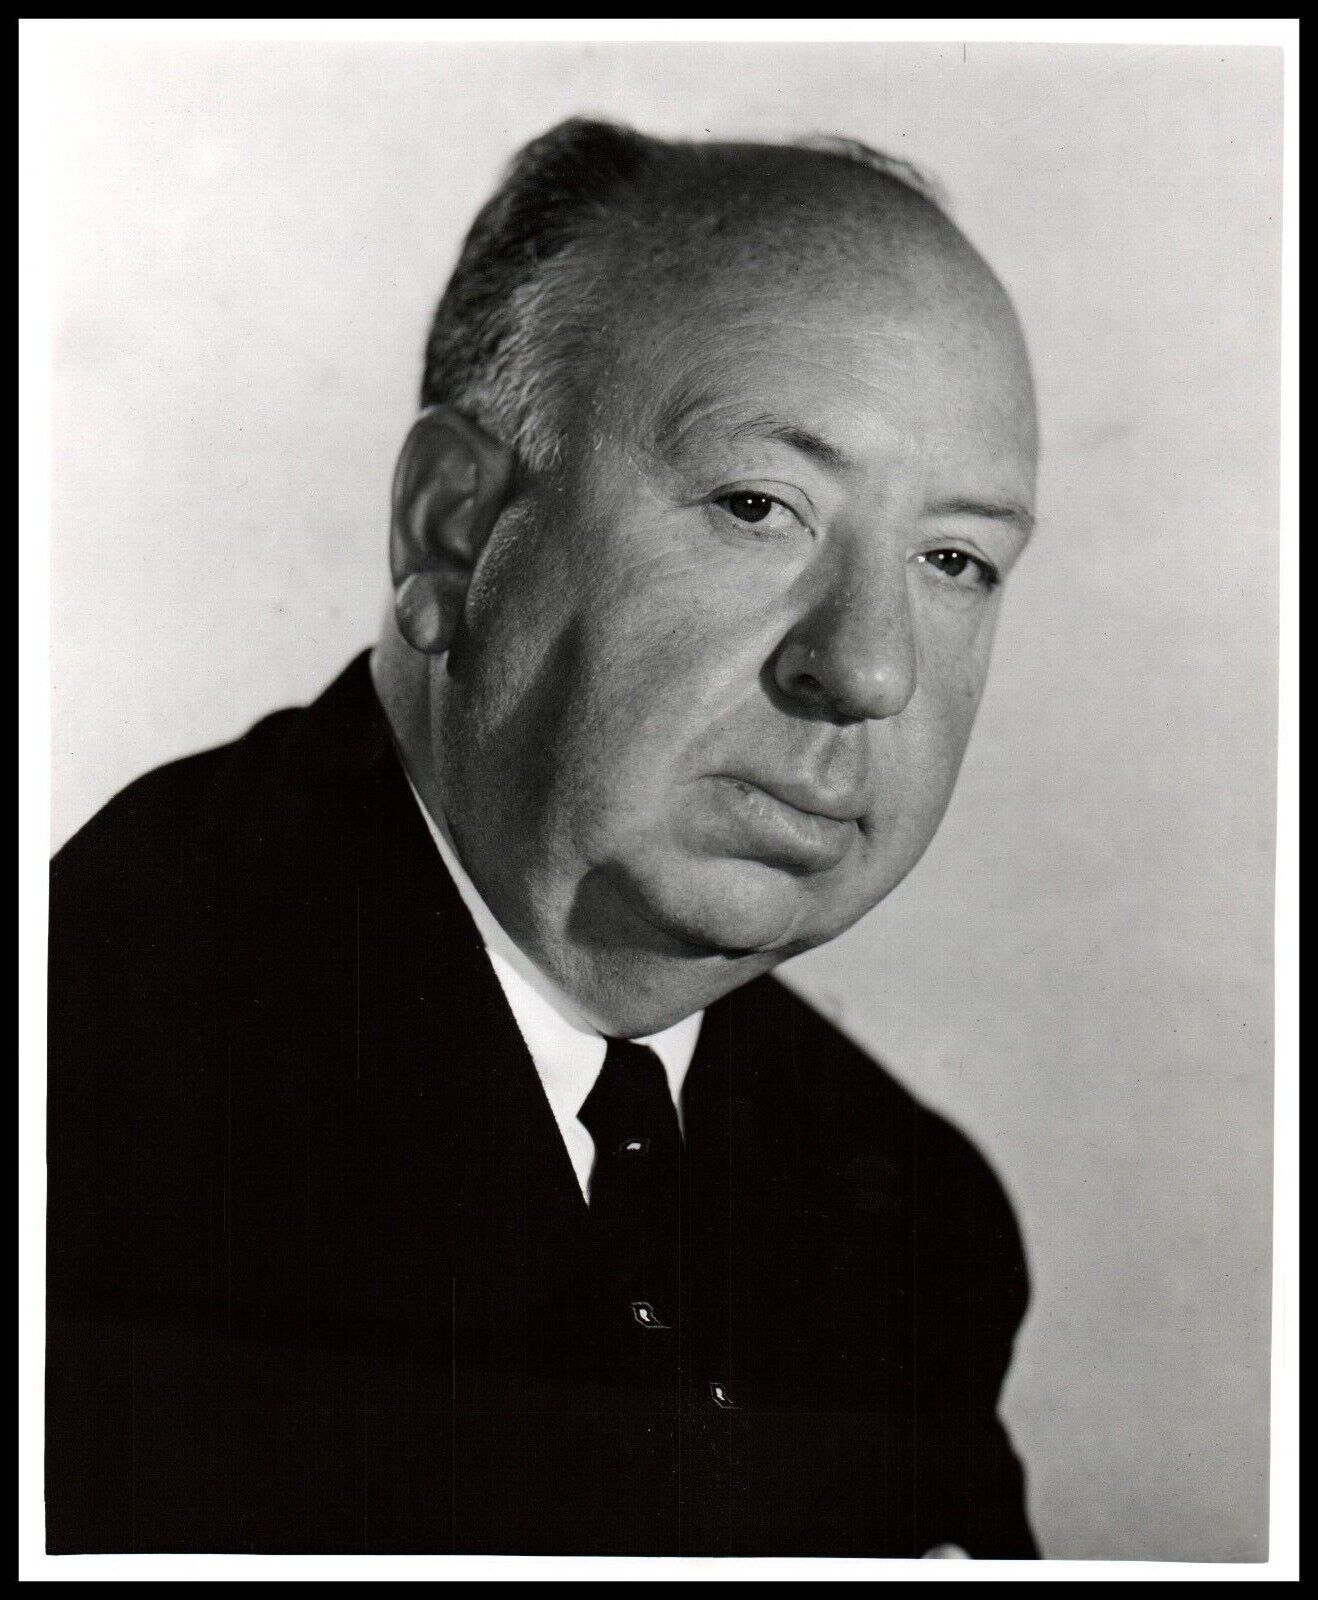 Hollywood ICONIC DIRECTOR ALFRED HITCHCOCK by RONA PORTRAIT 1940s Photo 400